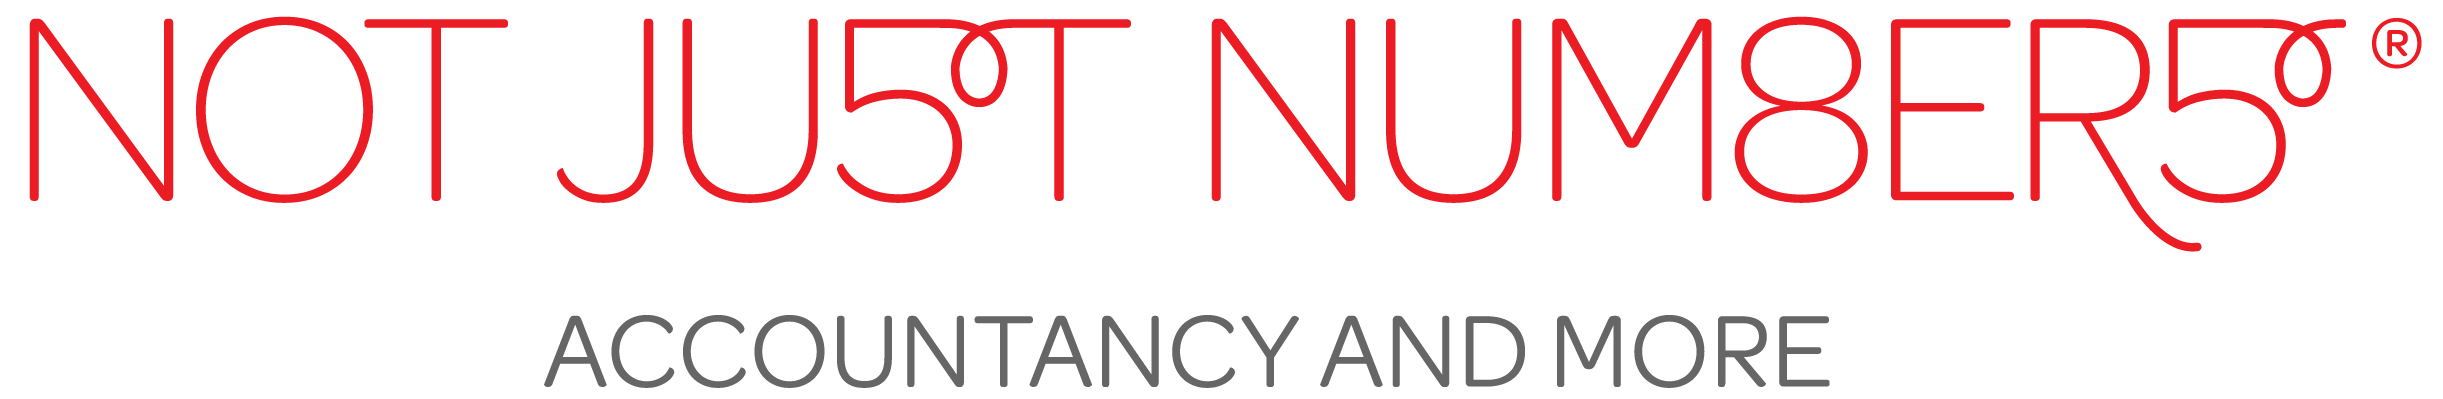 Not Just Numbers accountancy logo